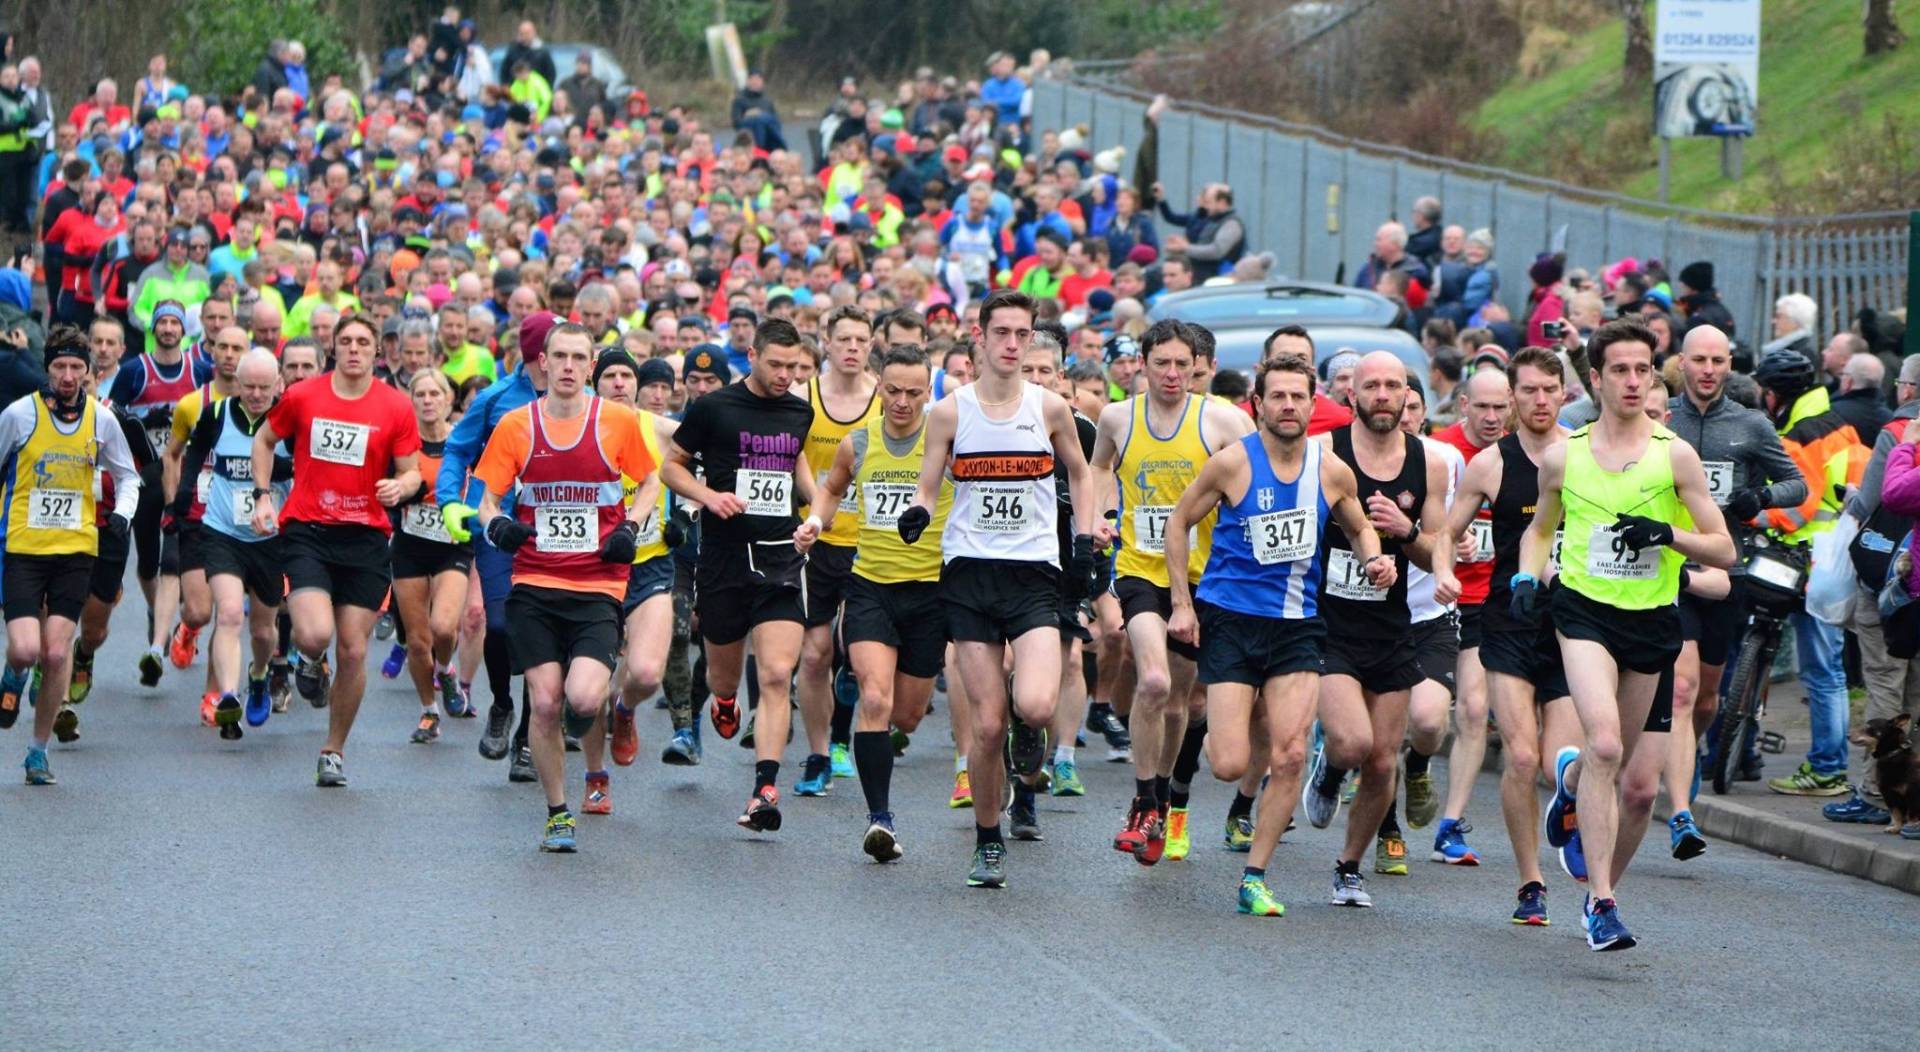 Win for Samantha at Bath – Morgan & Nick at Northern Indoor Championships – 2nd for Steven at Ashurst Beacon – 2nd for Matt at East Lancs 10k – Nine Standards Fell Race